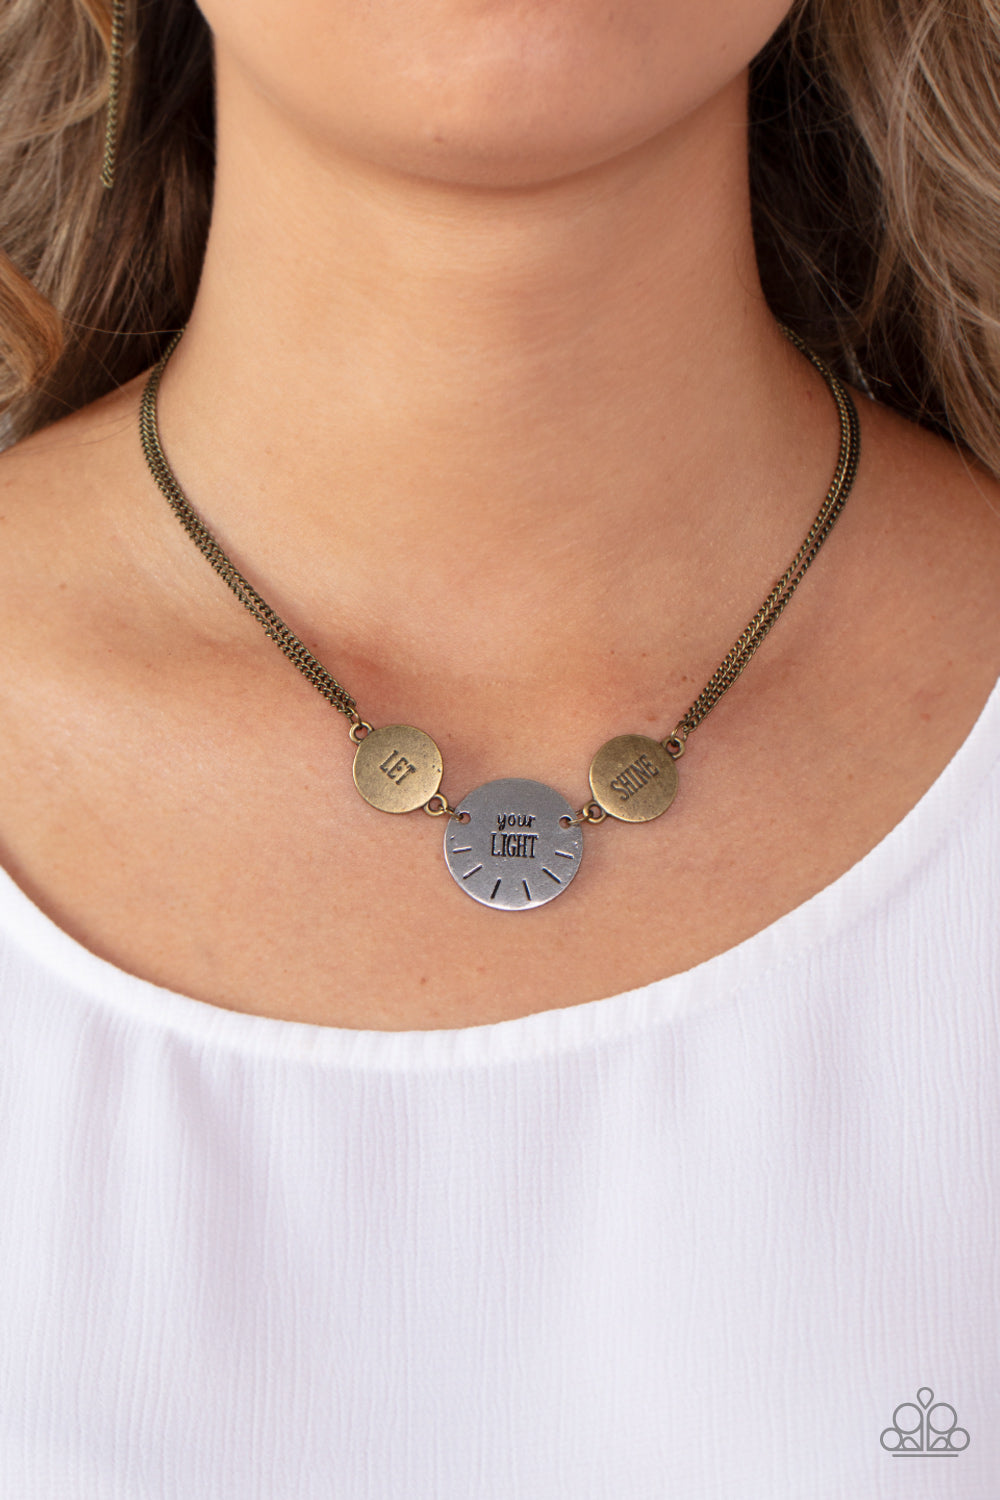 what you shine a light on cup half full necklace – Emily Rosenfeld